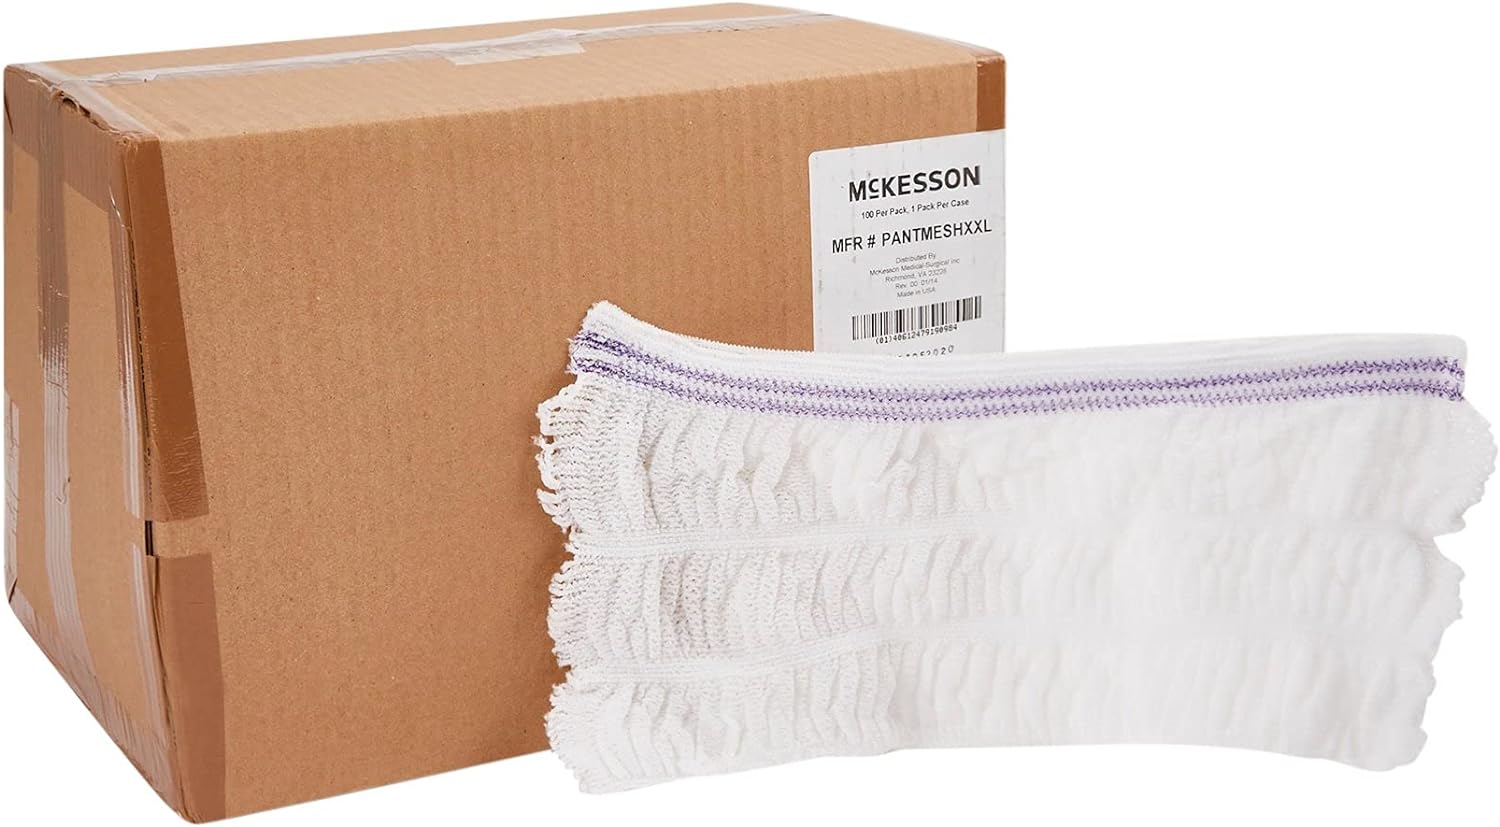 McKesson Knit Pants, Incontinence, Disposable, Recovery, Postpartum, Surgical, 2XL, 100 Count